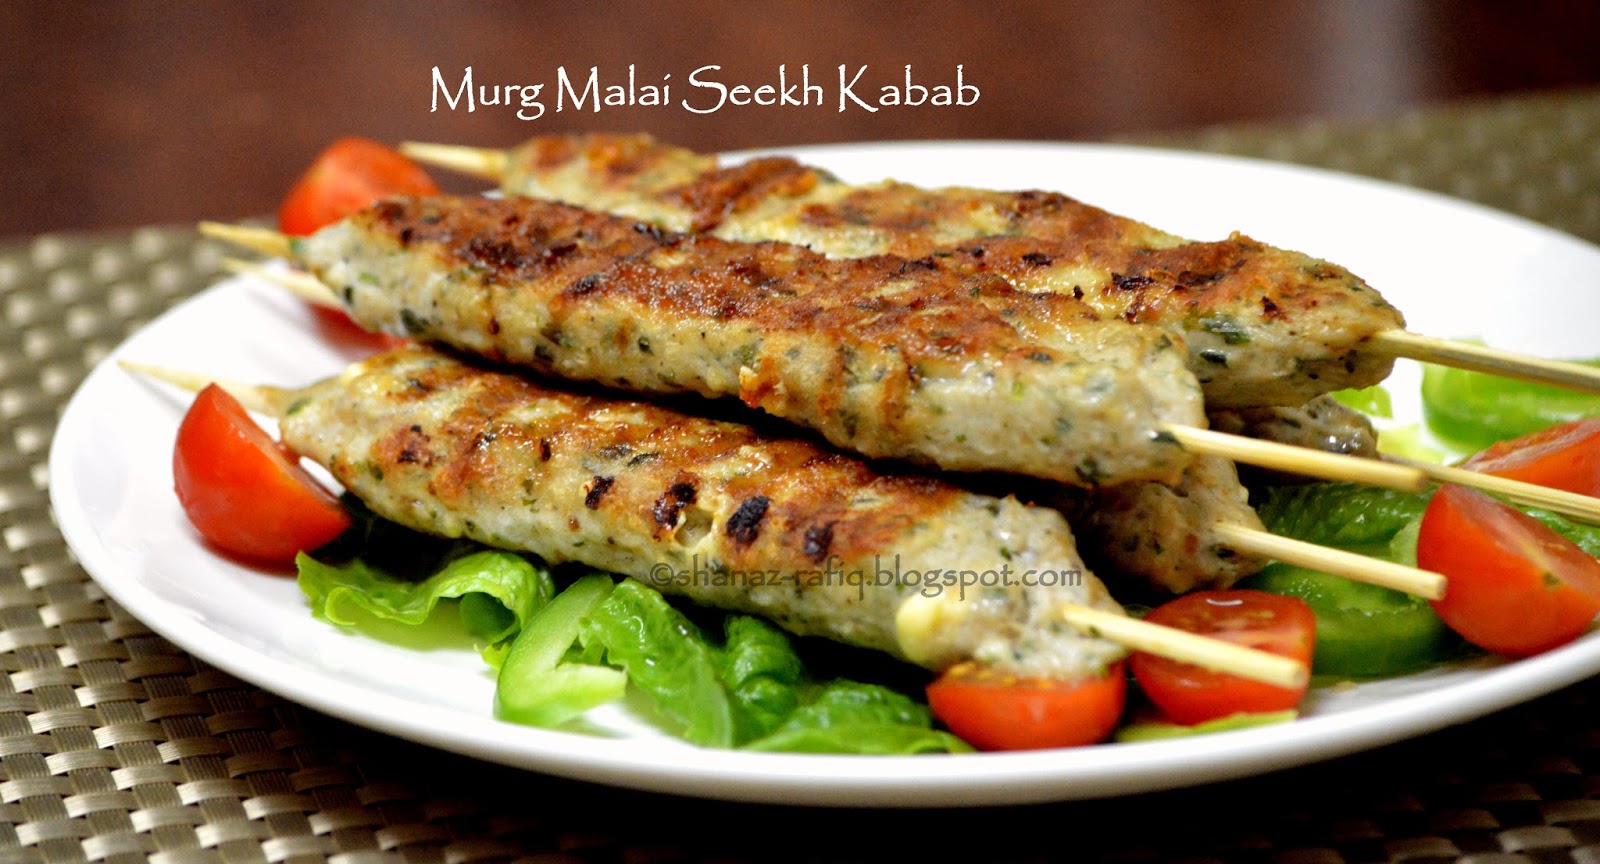 Image result for How to make Cheesy Seekh Kabab - Cheese mixed with chicken mince and masalas, wrapped around satay sticks and grilled